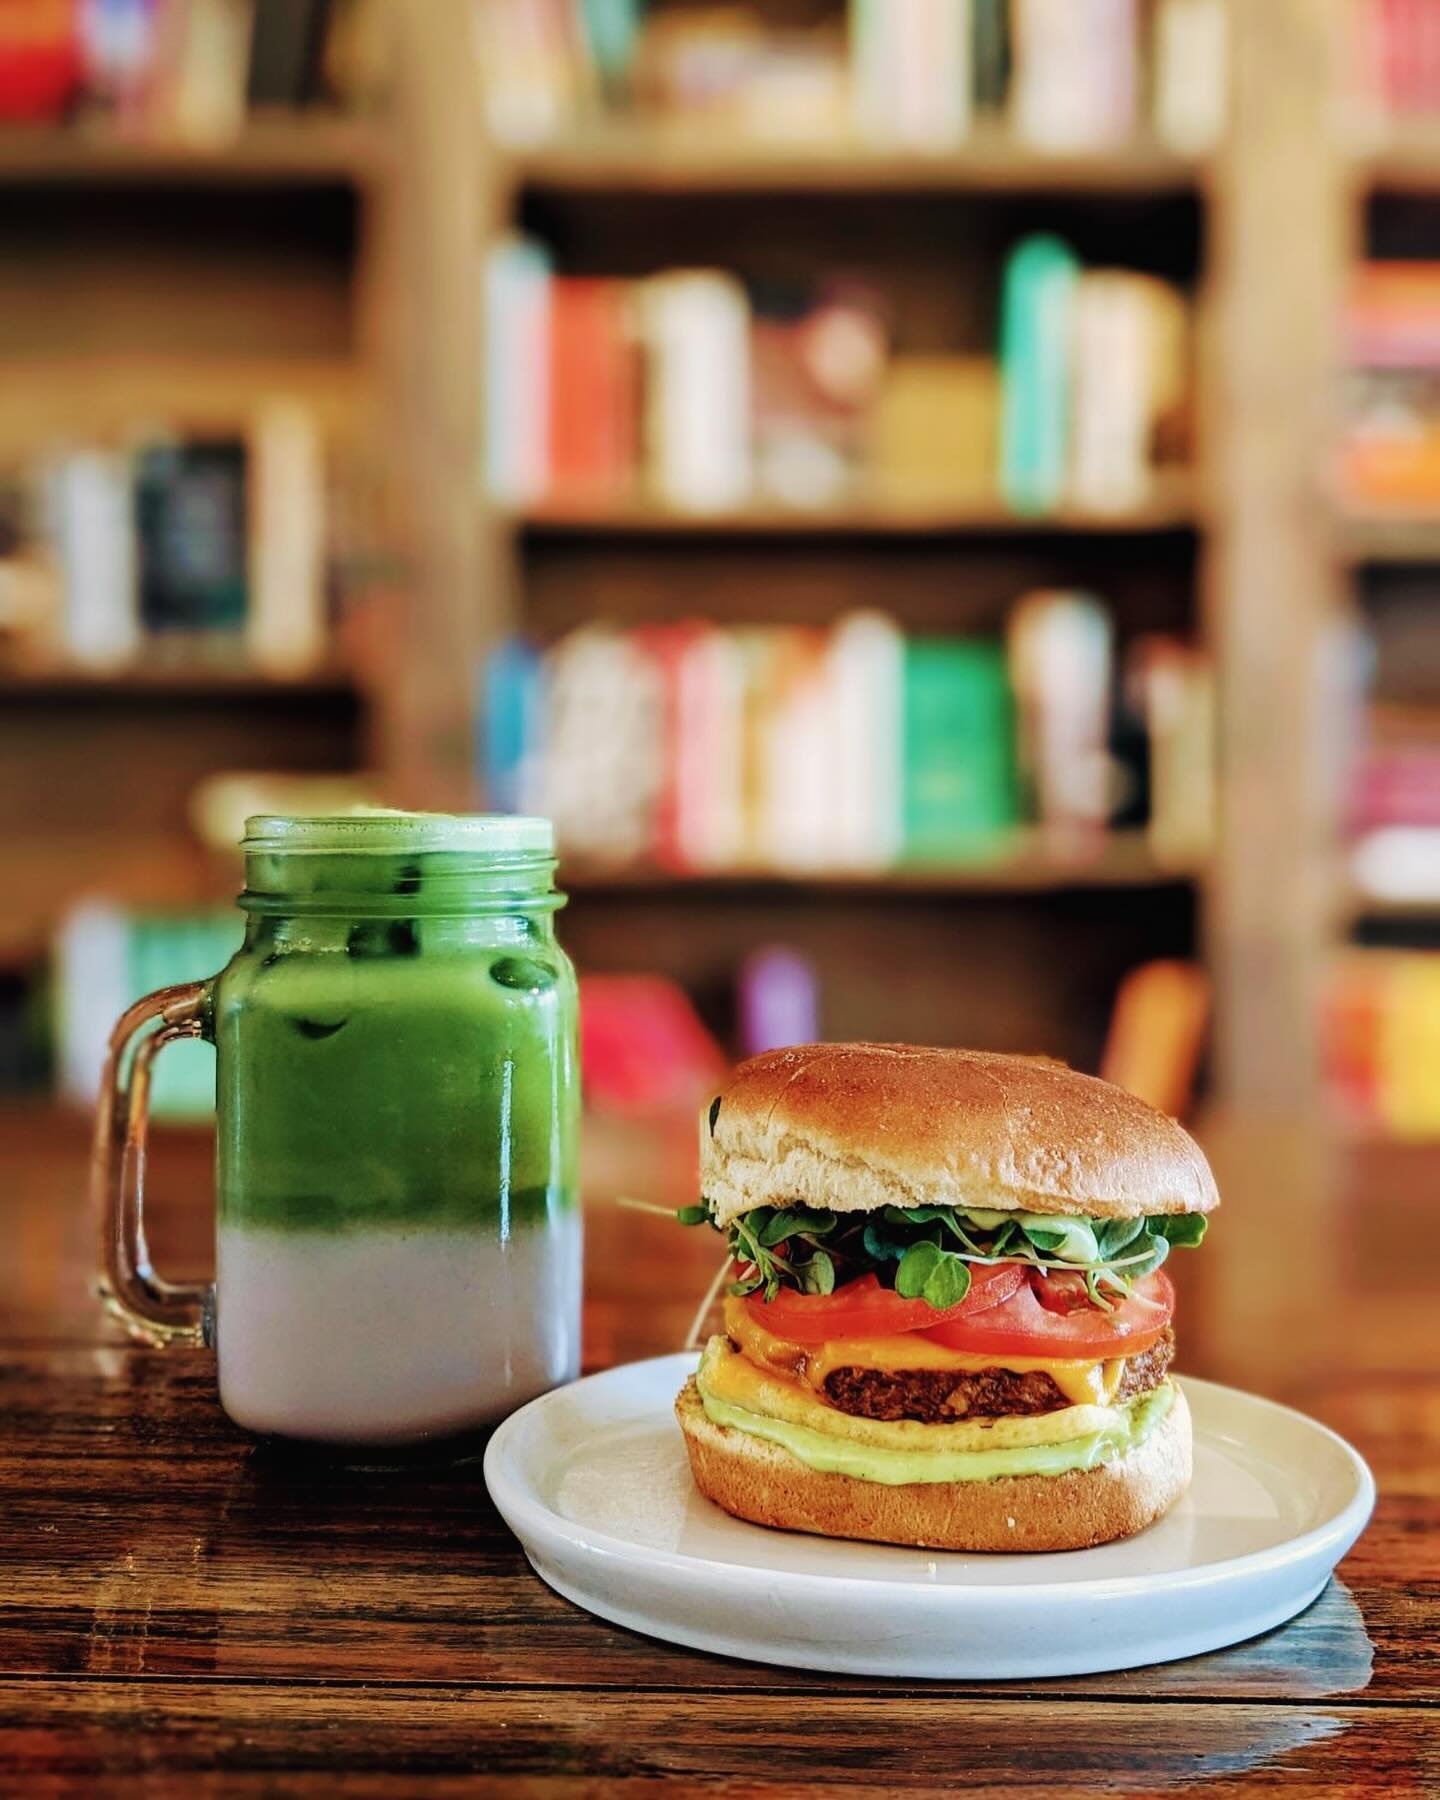 Sippin&rsquo; and munchin&rsquo; all day long on our marzipan matcha latte + classic breakfast sandwich on a soft pillowy brioche roll 🤤

#brcapecod #vegan #plantbased #marzipanmatcha #matchalatte #brioche #justegg #coffeeshop #breakfast #alldaylong